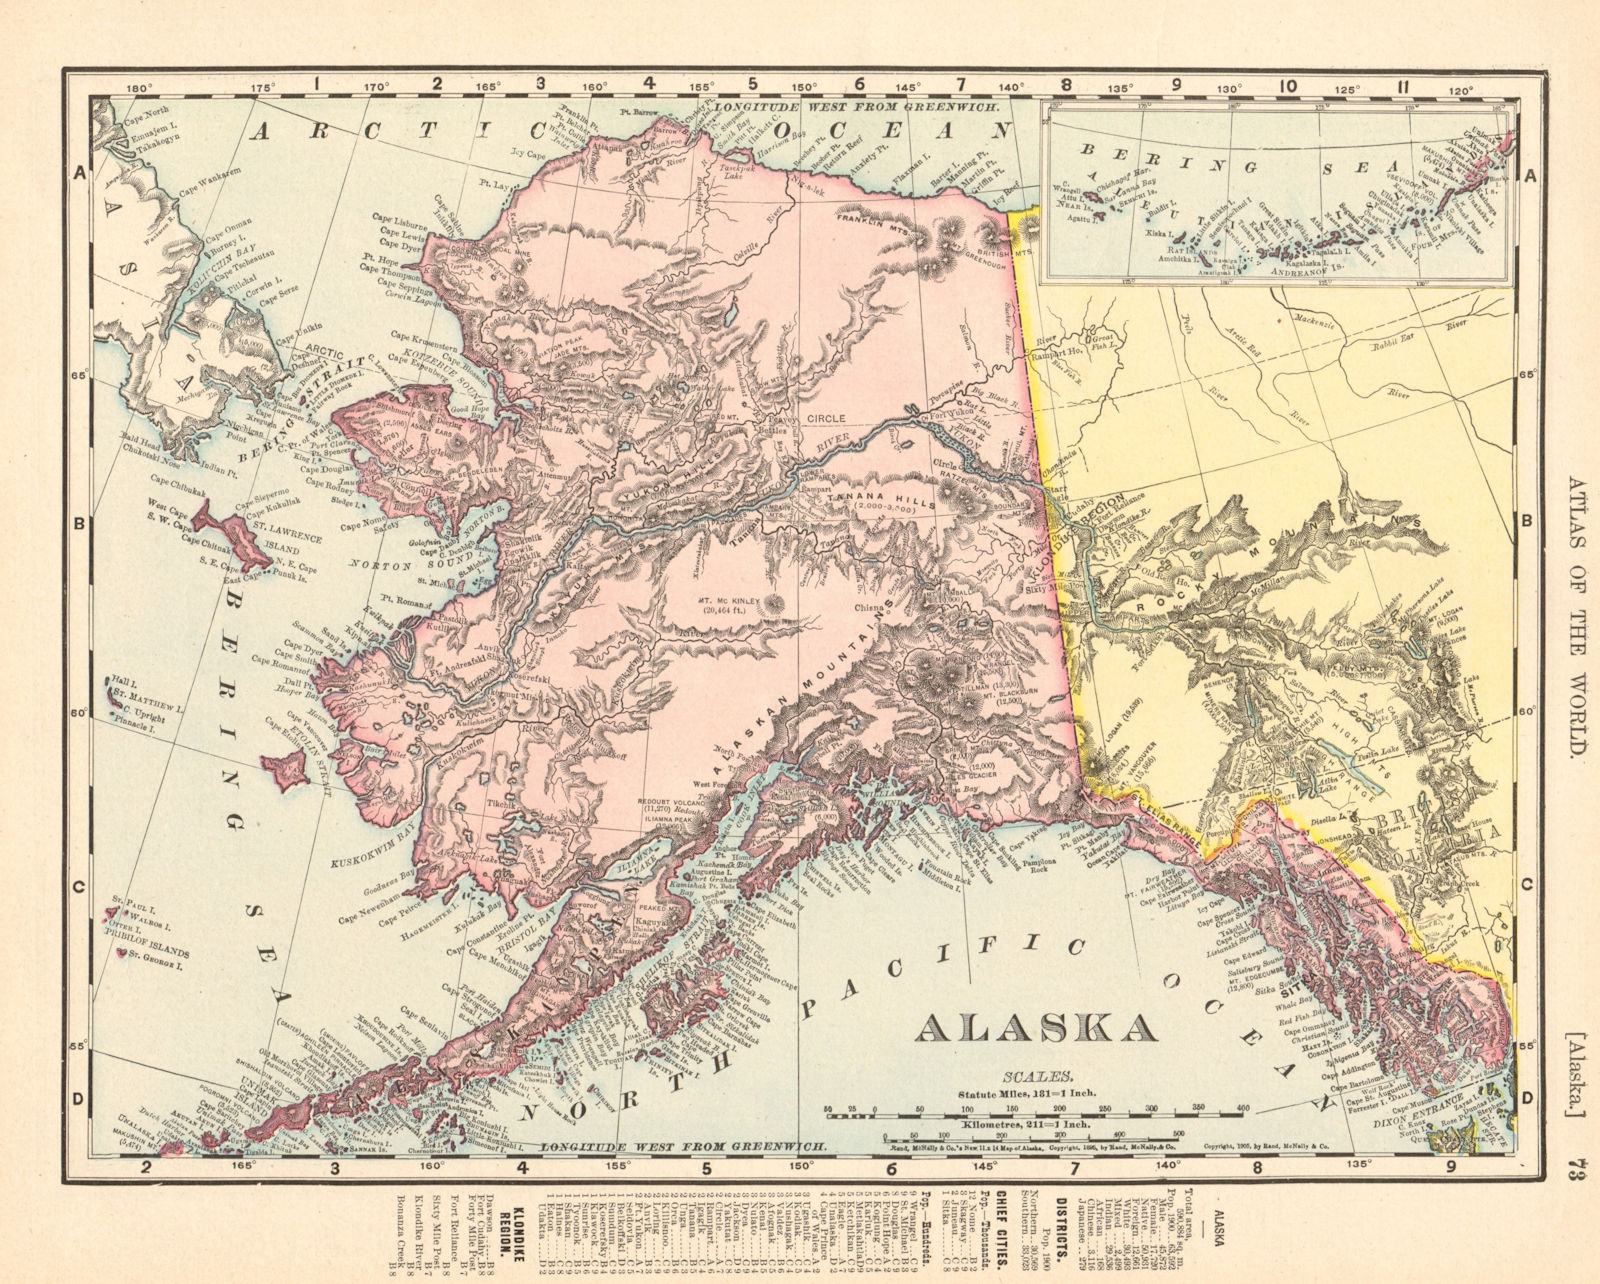 Alaska state map showing boroughs. Pre-Anchorage. RAND MCNALLY 1906 old